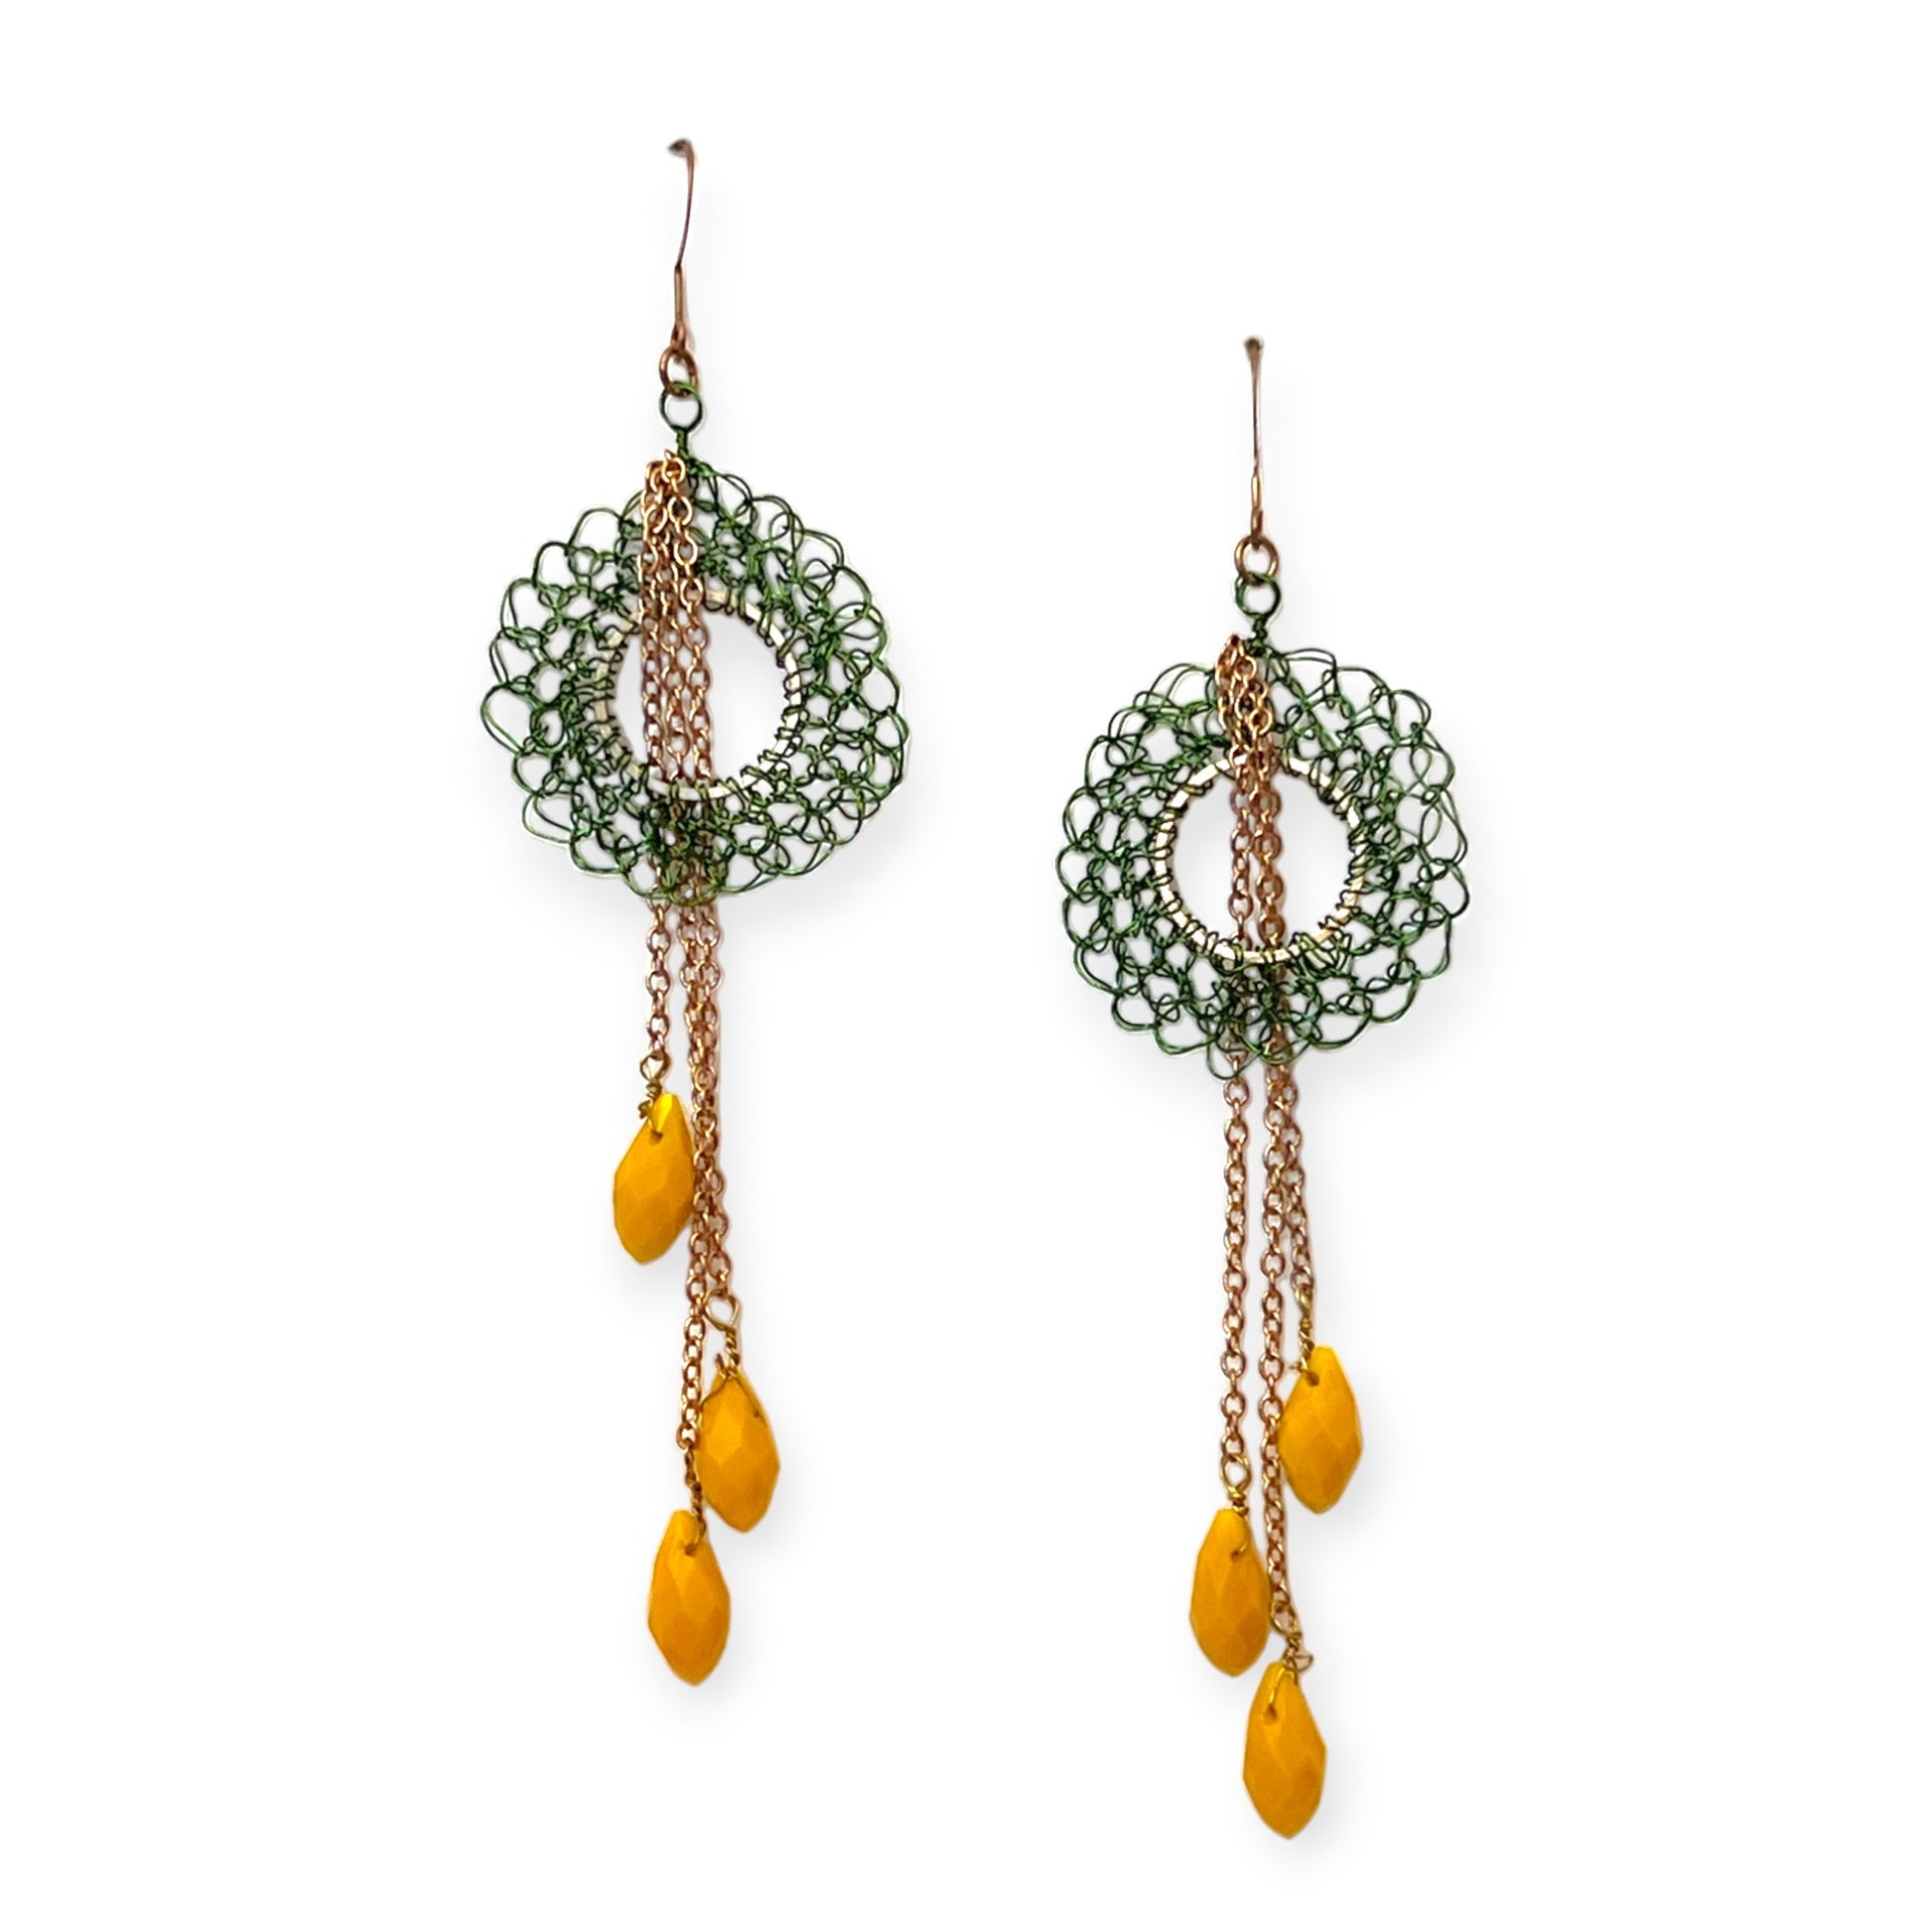 Drop earring with colorful woven ring with suspended crystals - Sundara Joon